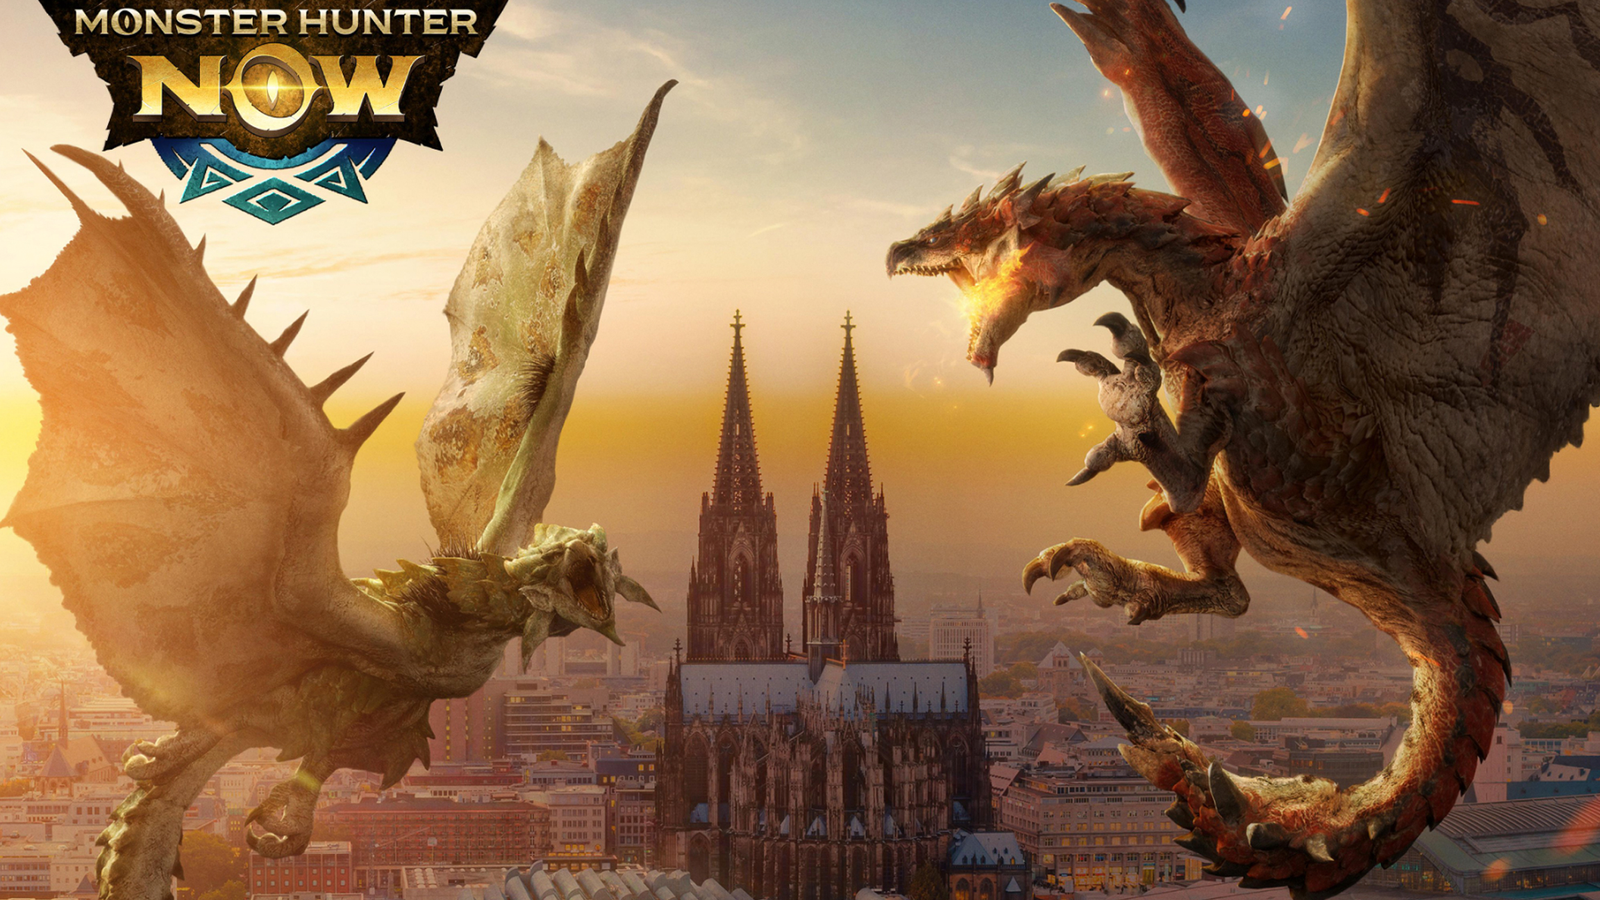 Monster Hunter NOW is NOW available, and you should go play it right NOW